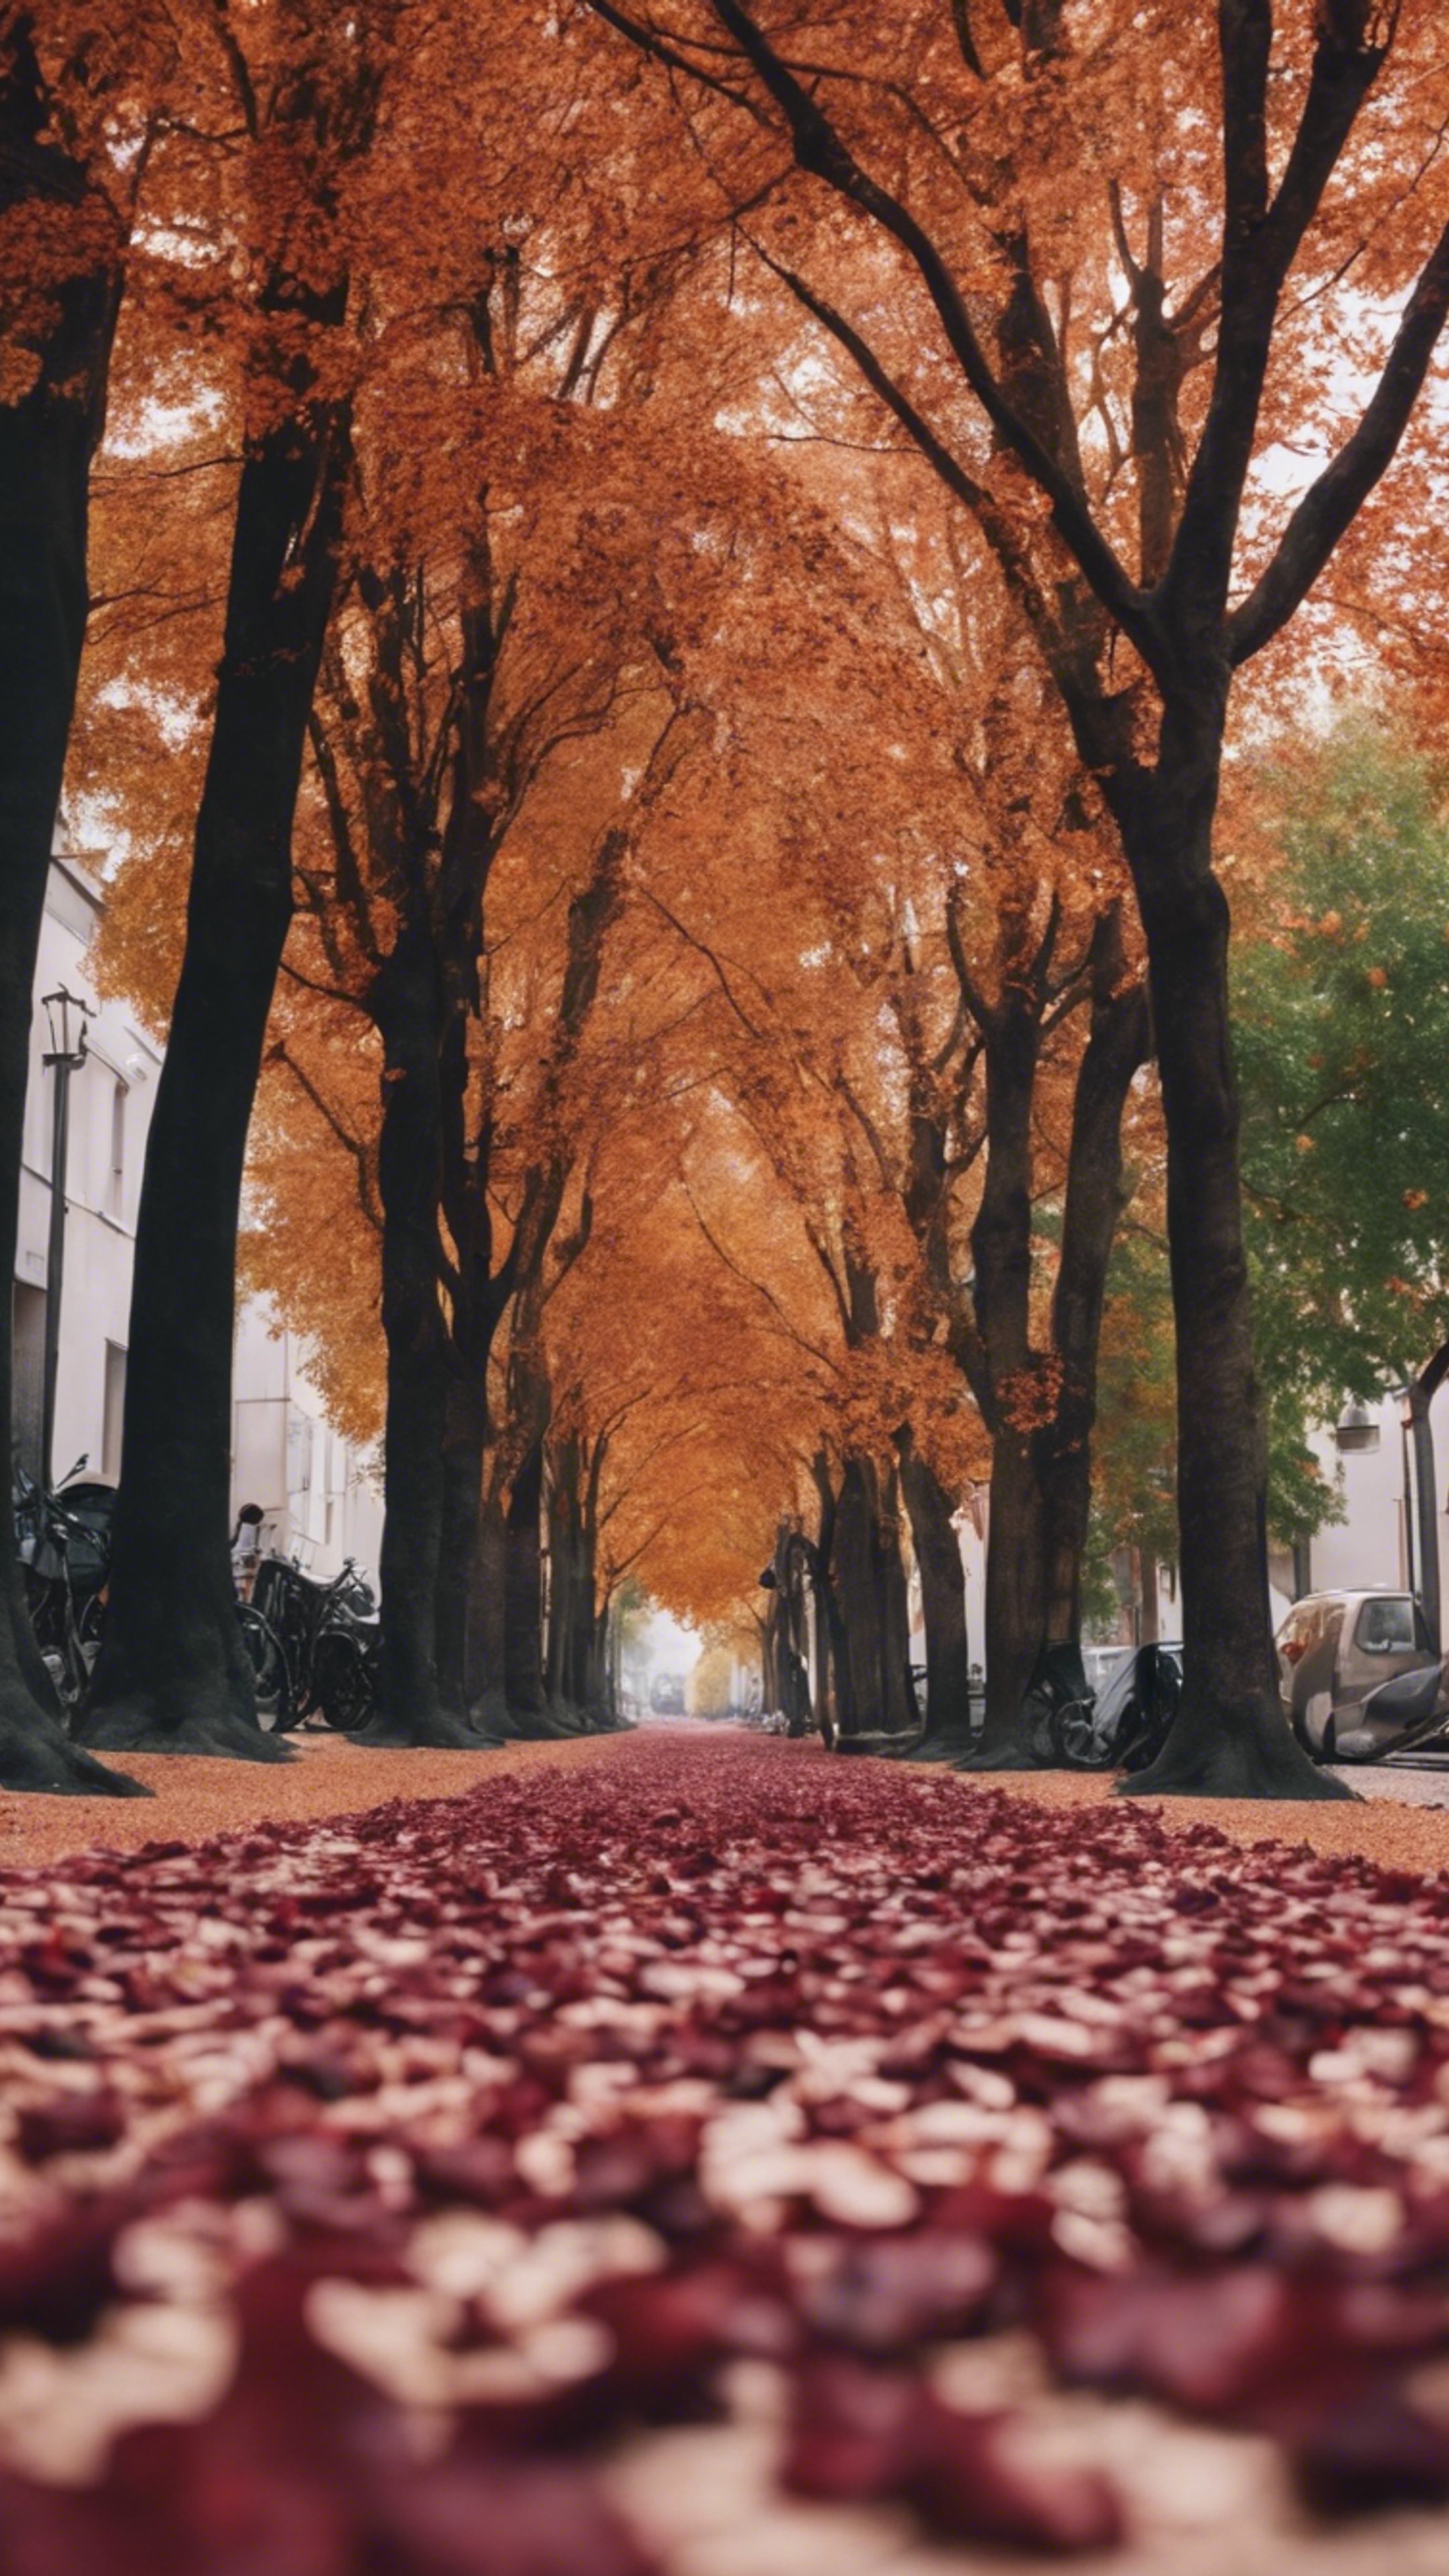 A street in autumn with burgundy leaves falling from the trees creating a beautiful comfortable carpet. Wallpaper[db339216d700423d88d1]